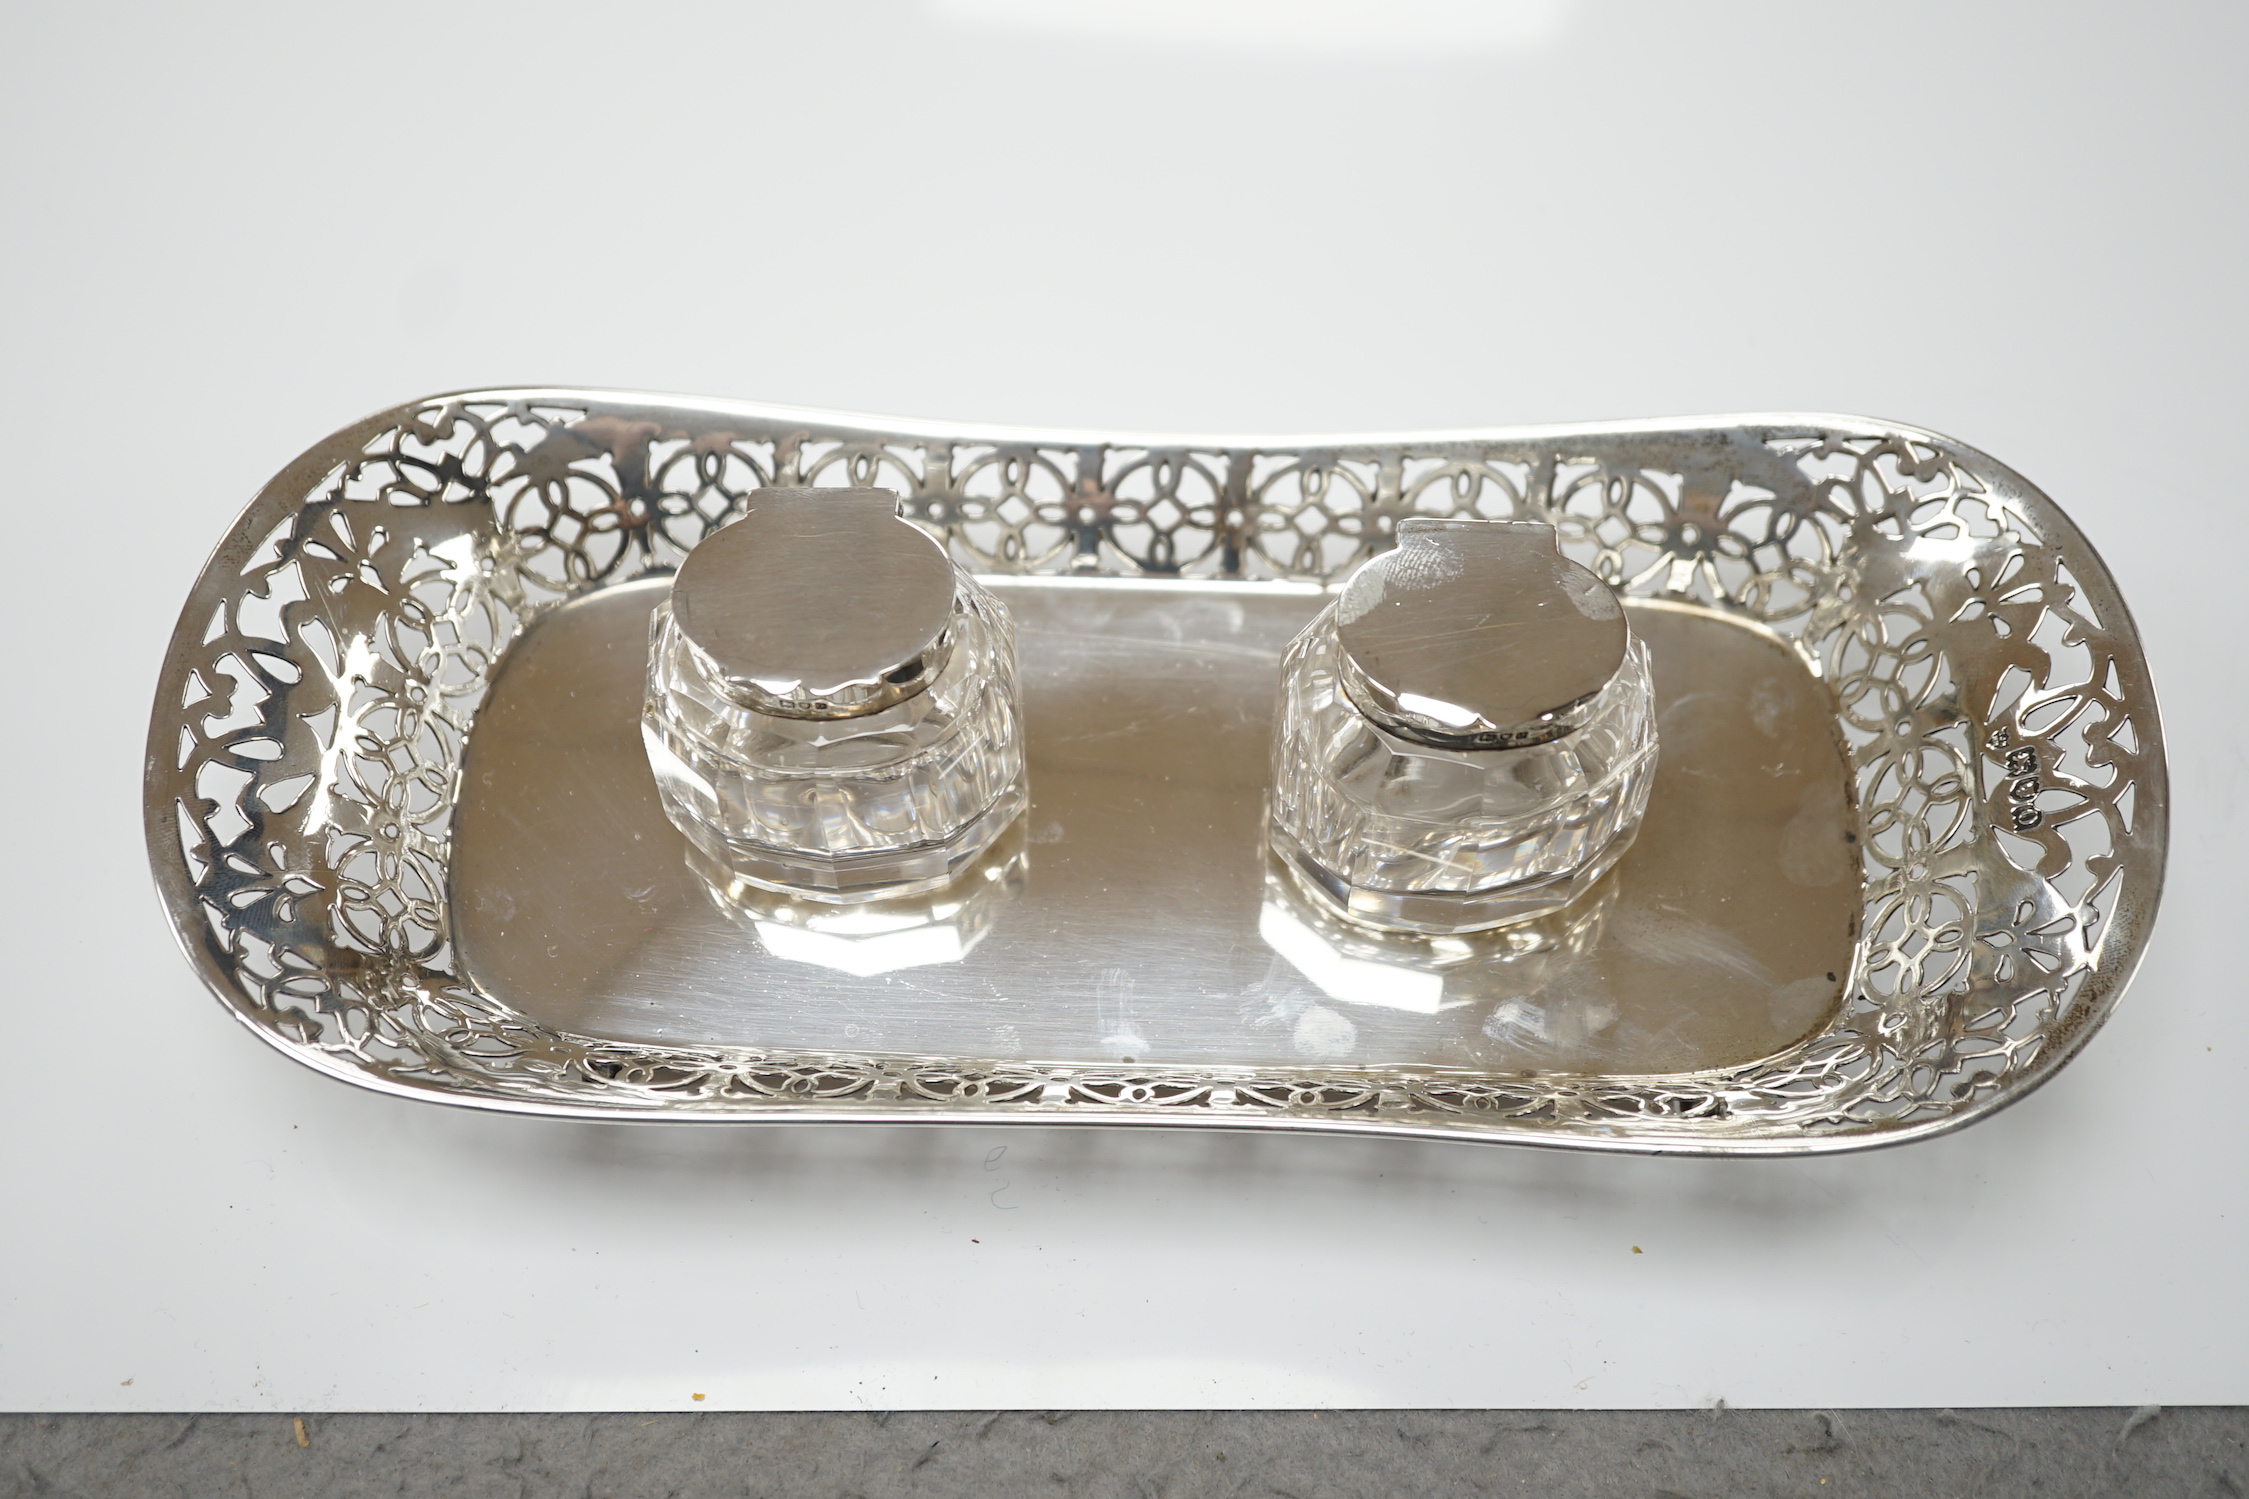 An Edwardian pierced silver inkstand, with two mounted glass wells, on four feet, Haseler Brothers, London, 1909, 26.2cm, 6.5oz.